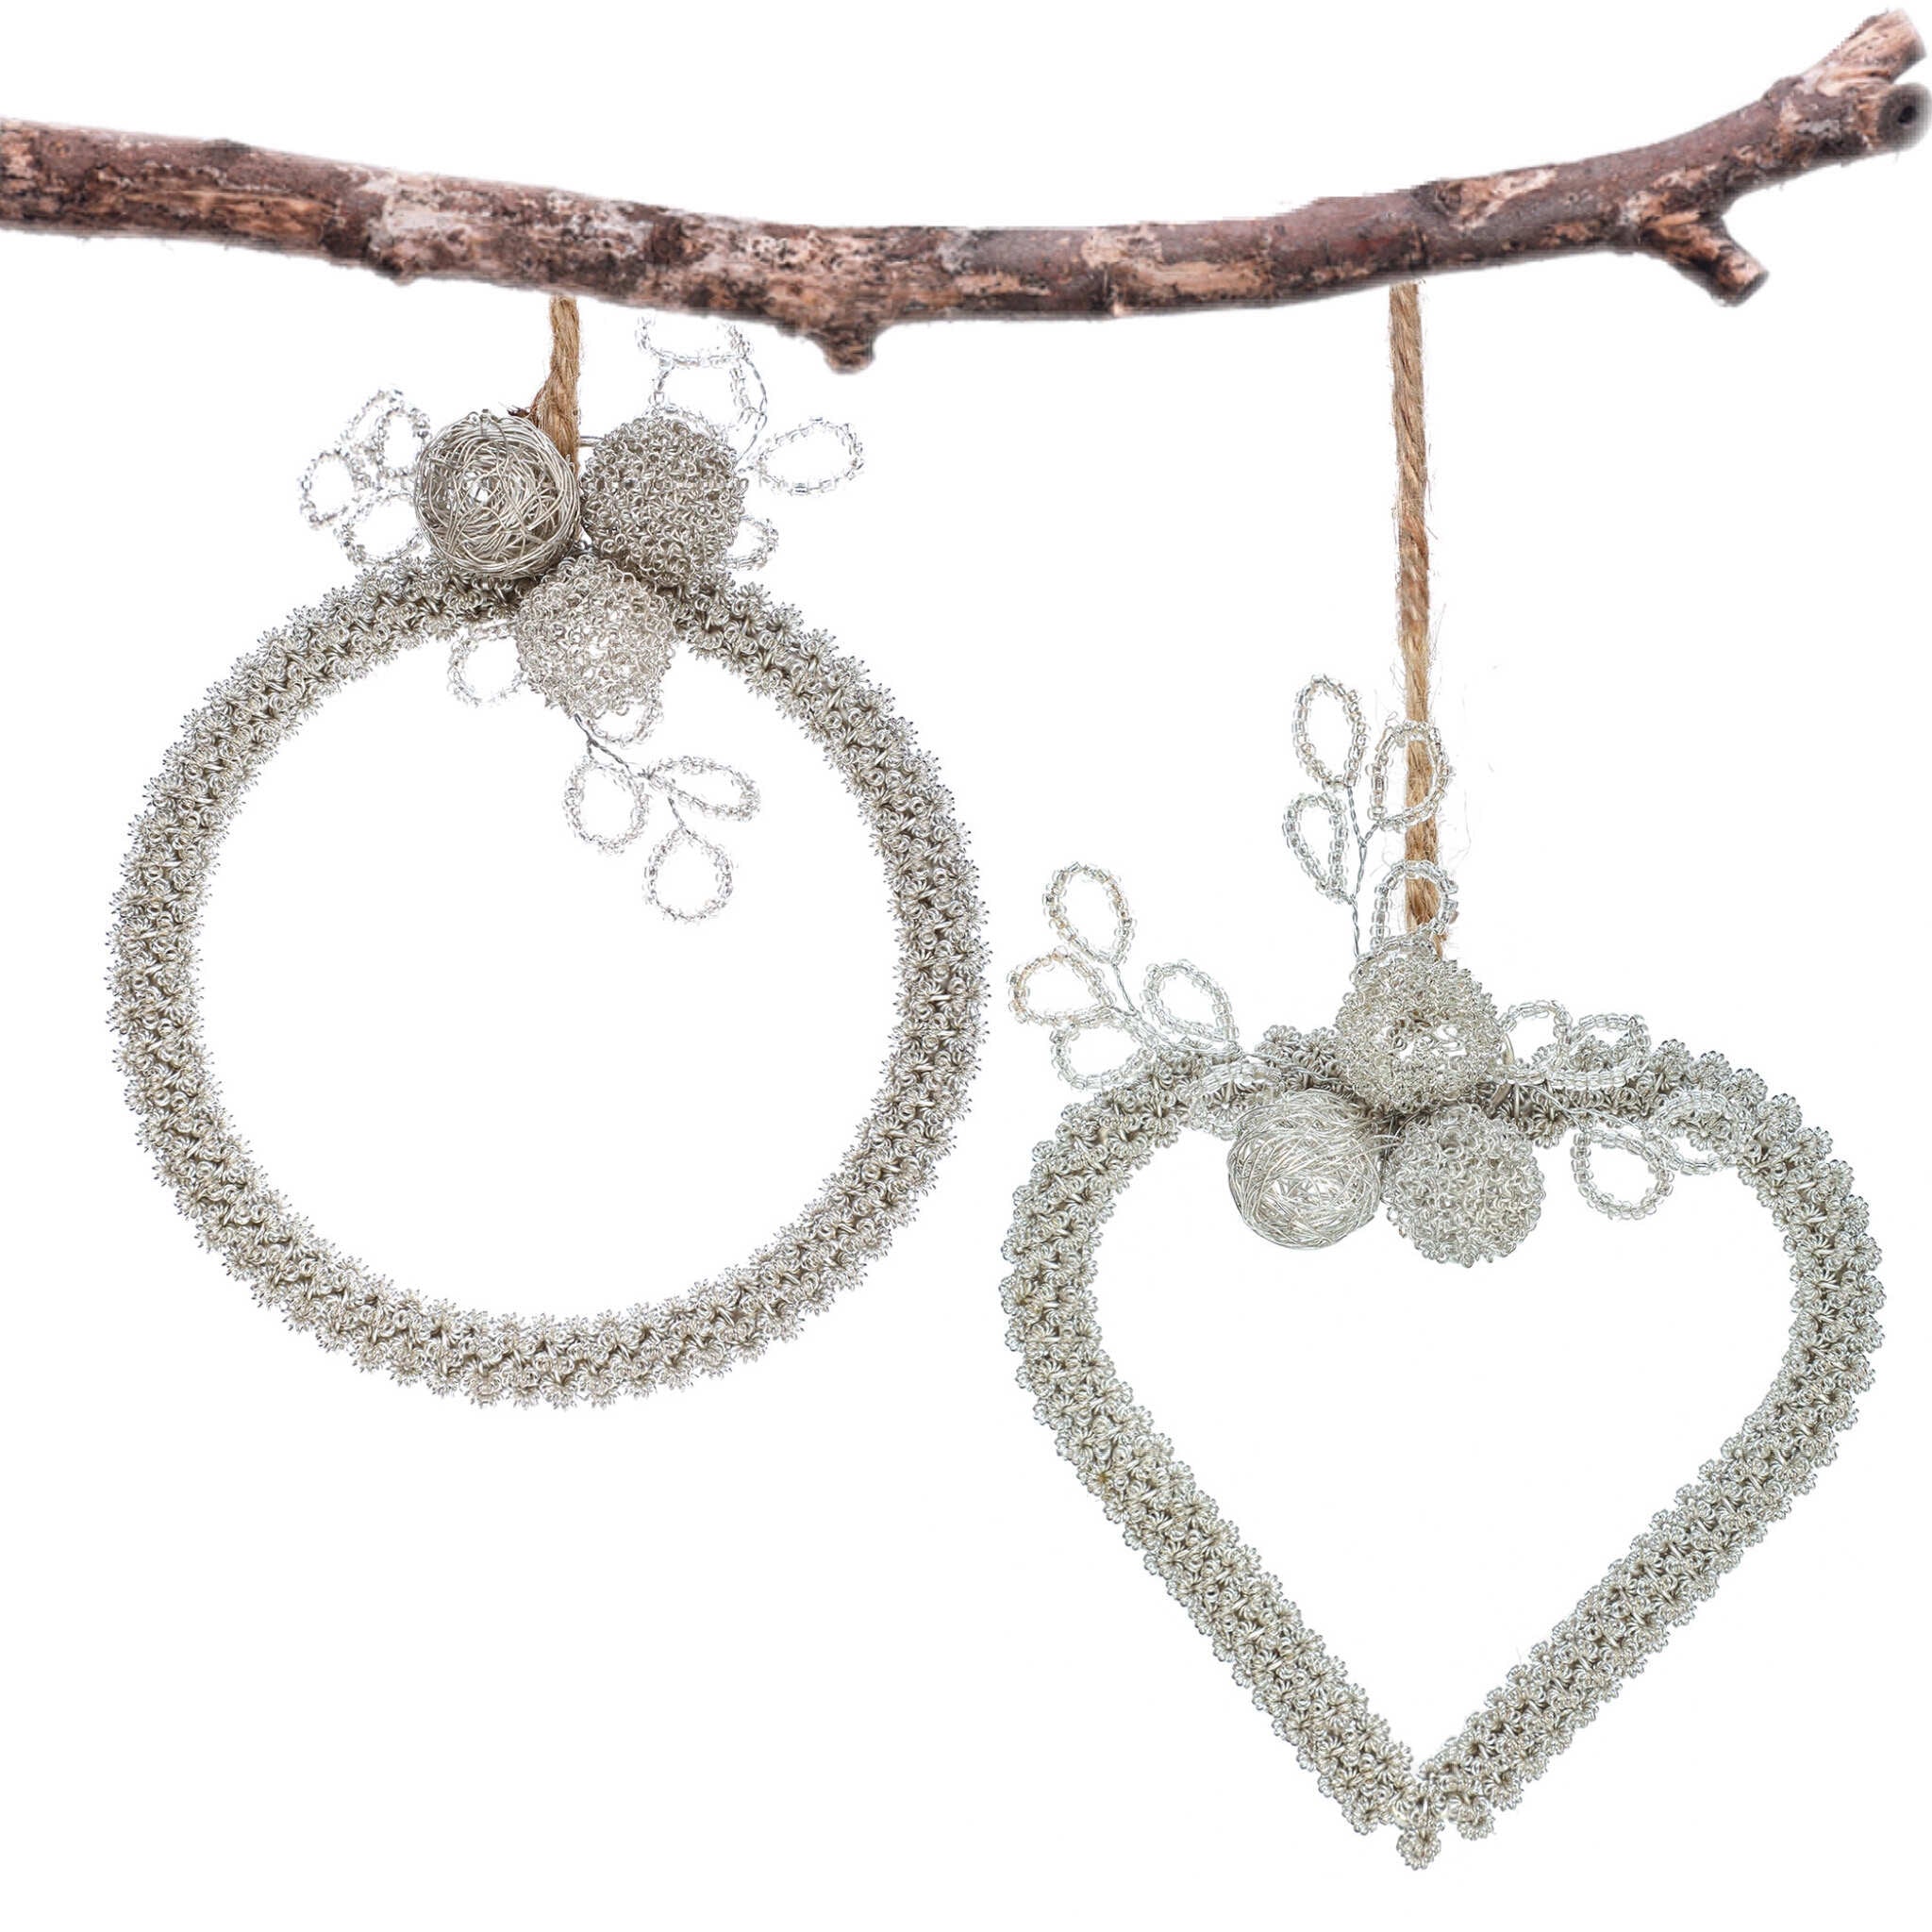 Soul Mates Beaded Heart & Wreath Hanging in Silver, Set of 2